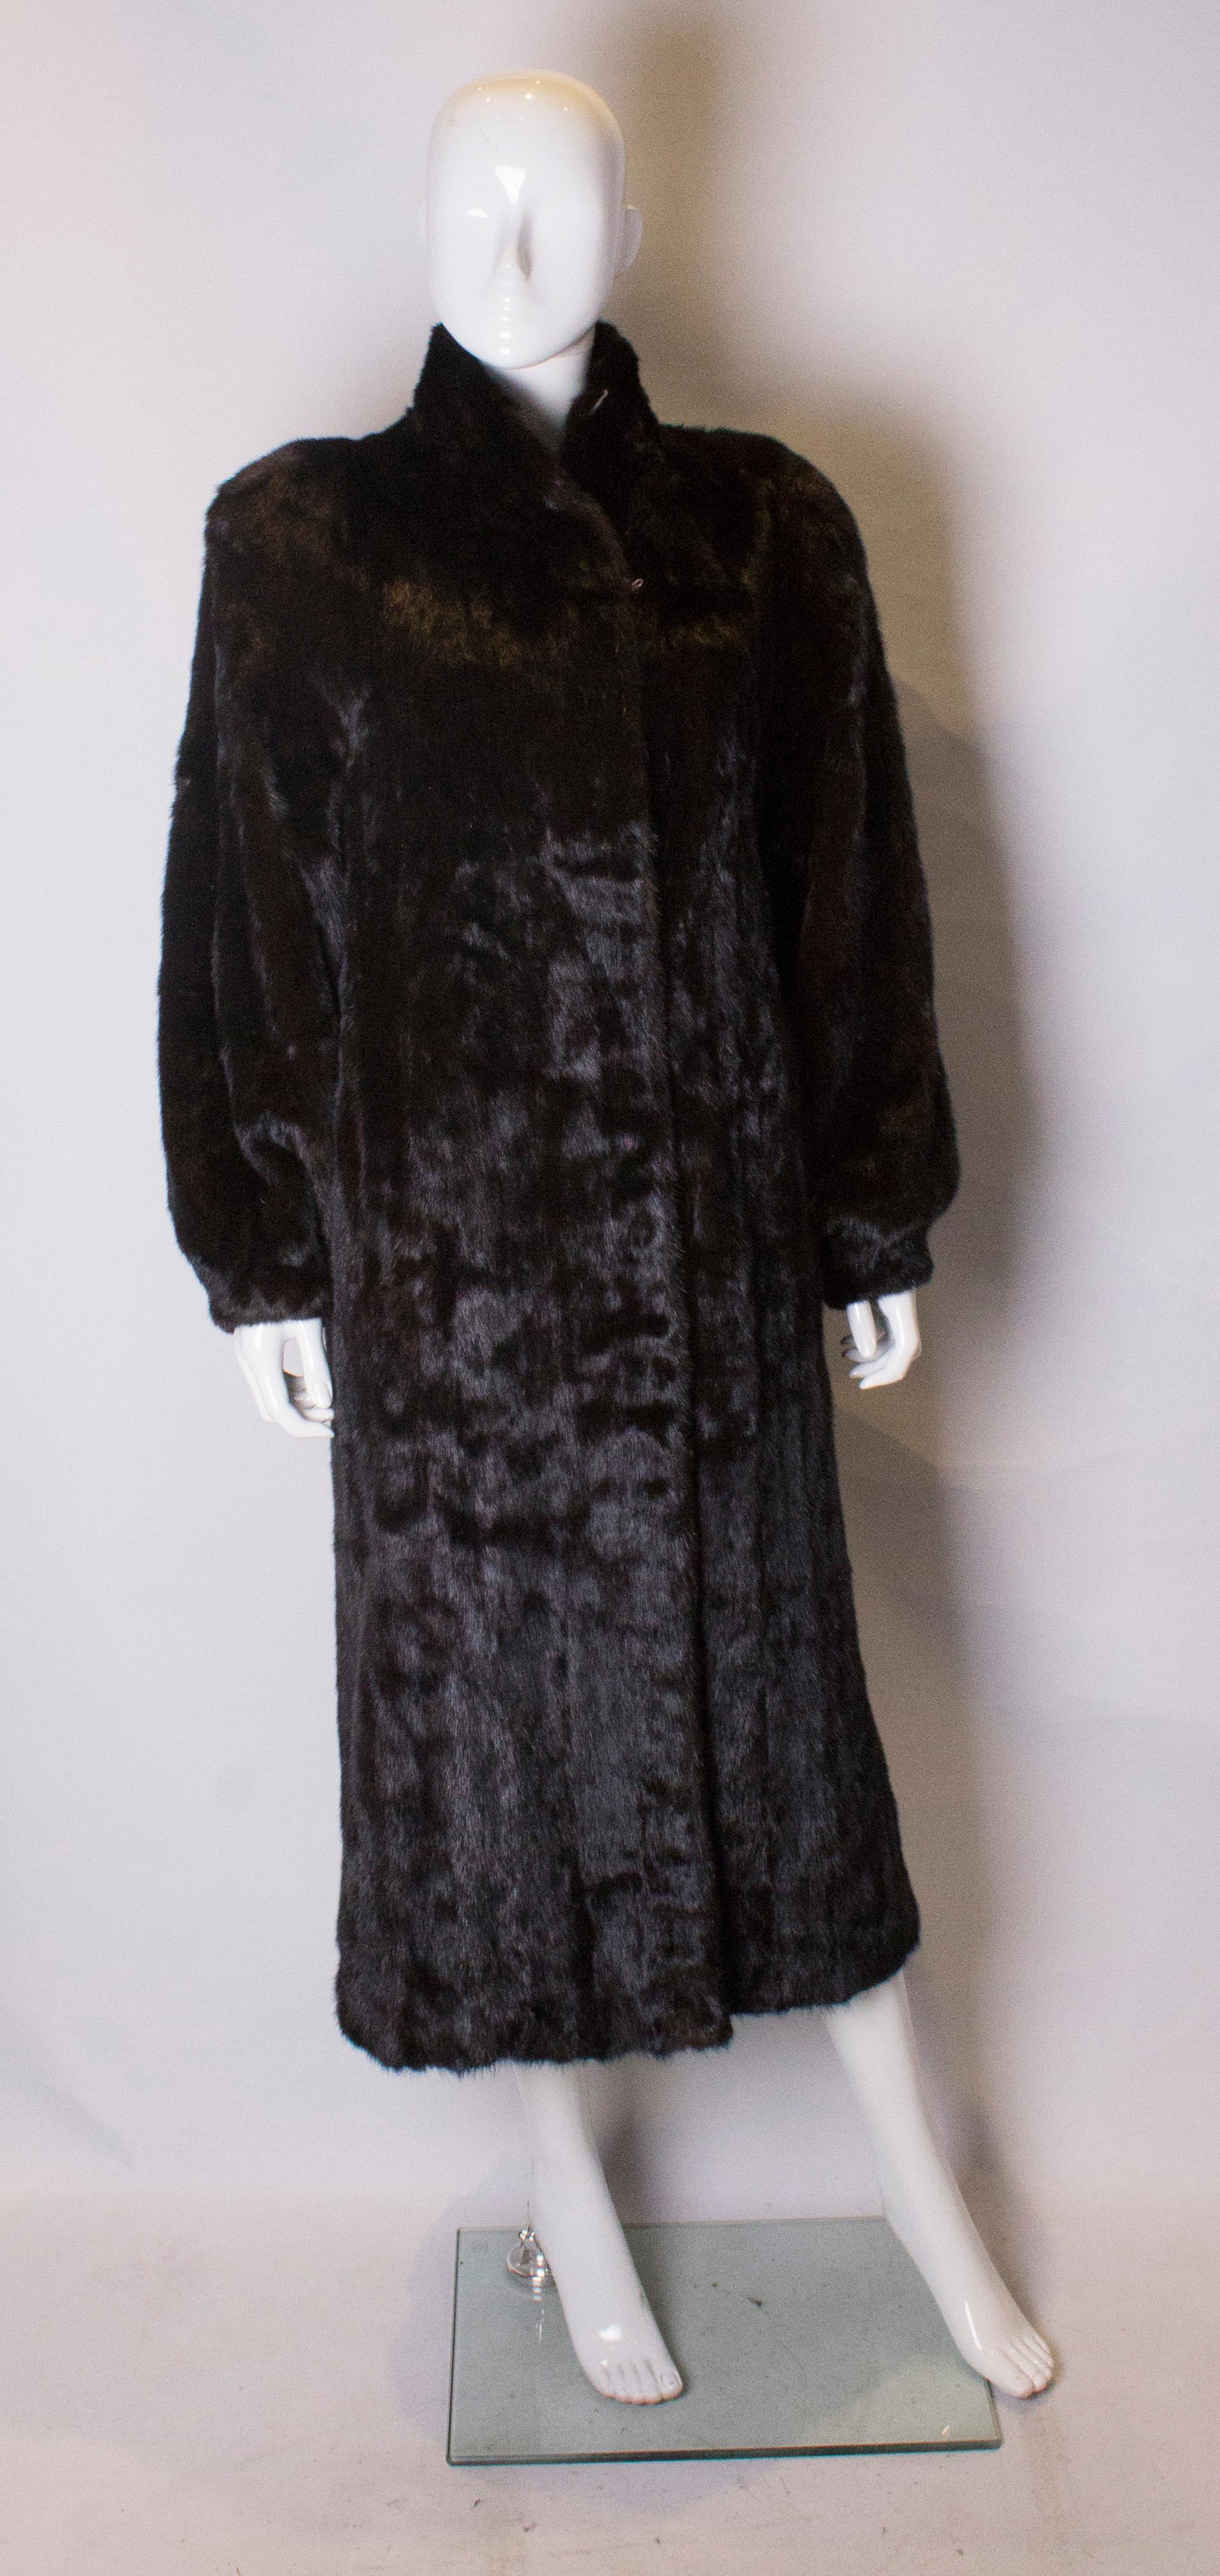 A chic and shinny full length mink coat.  The coat is fully lined, and easy to wear, with tapering sleaves.